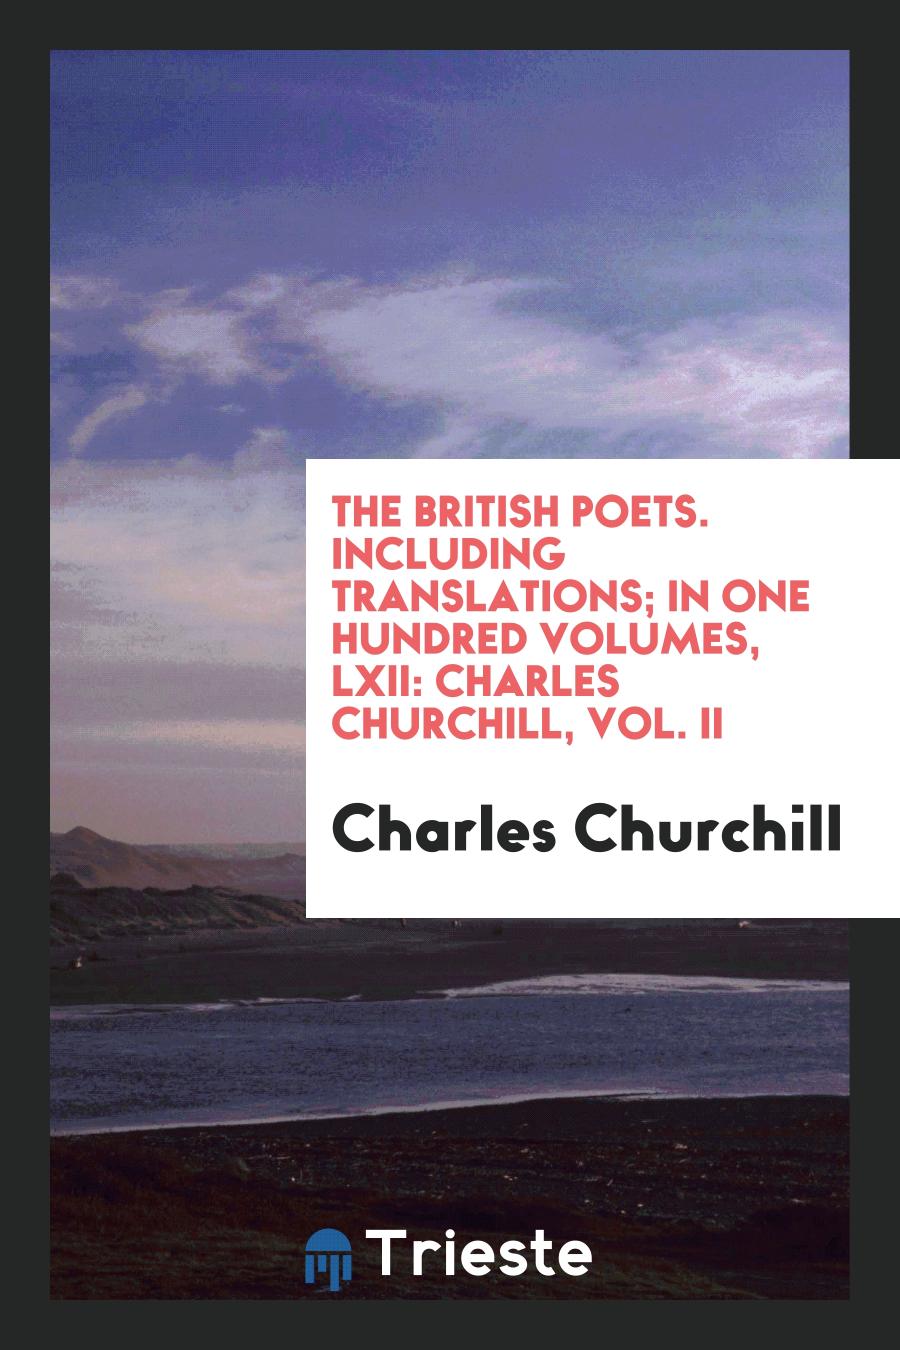 The British Poets. Including Translations; In One Hundred Volumes, LXII: Charles Churchill, Vol. II